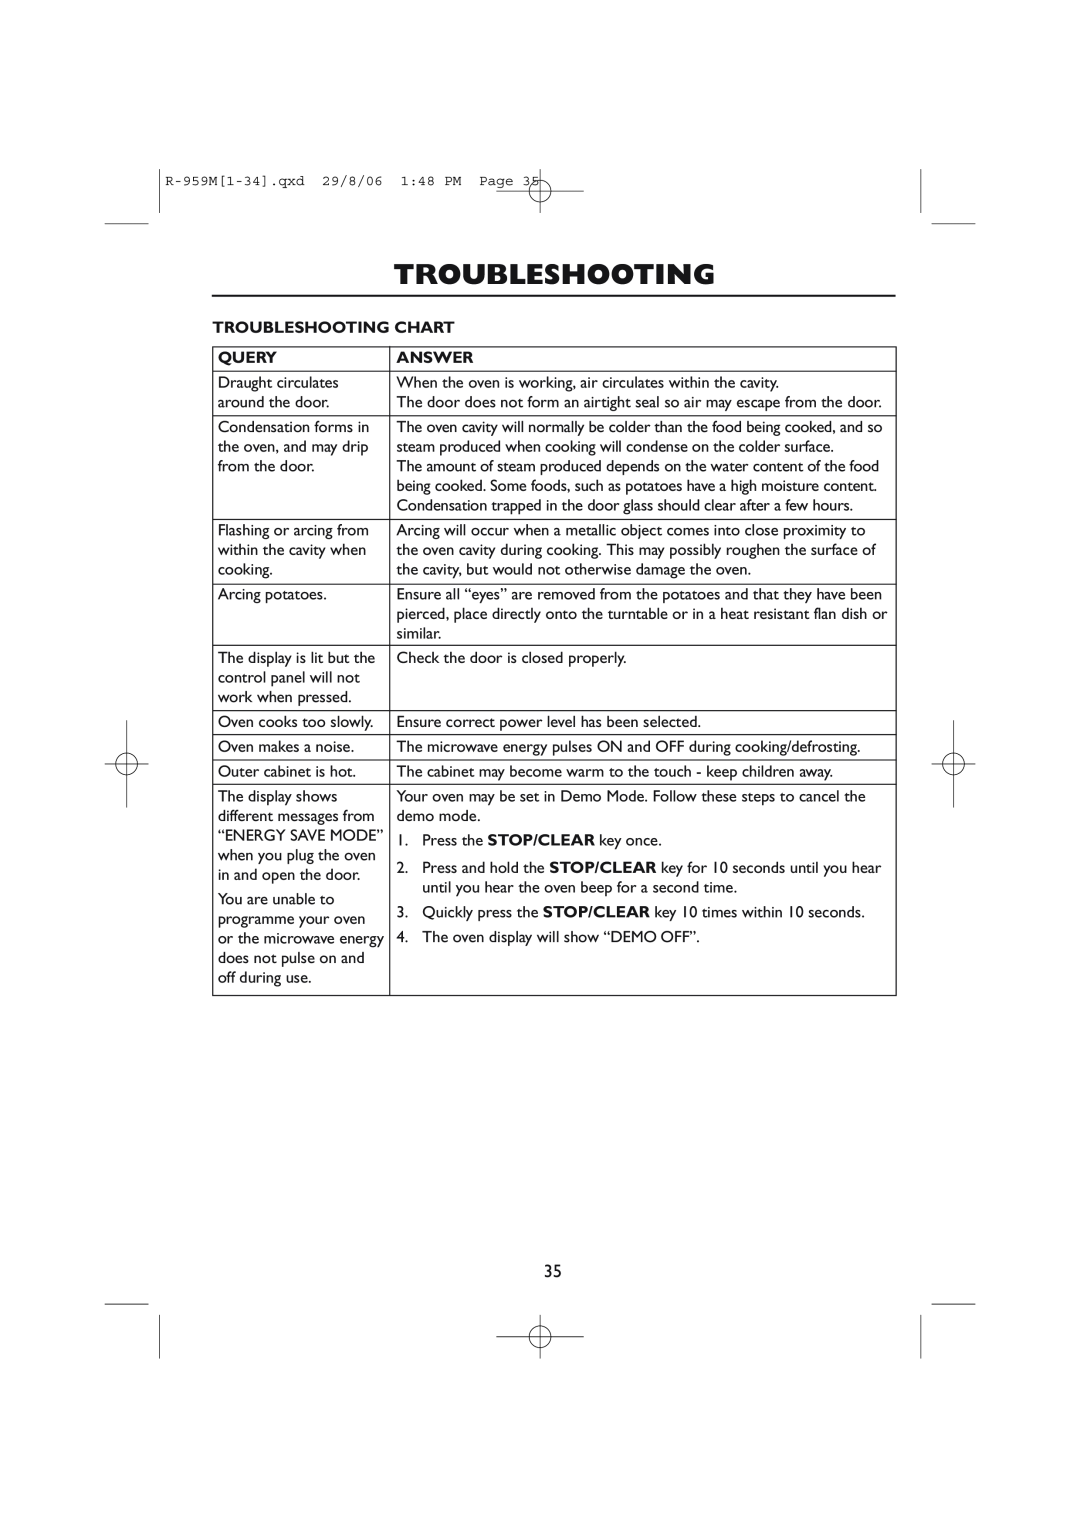 Sharp R-959M, R-98STM-A operation manual Troubleshooting Chart, Query, Answer 